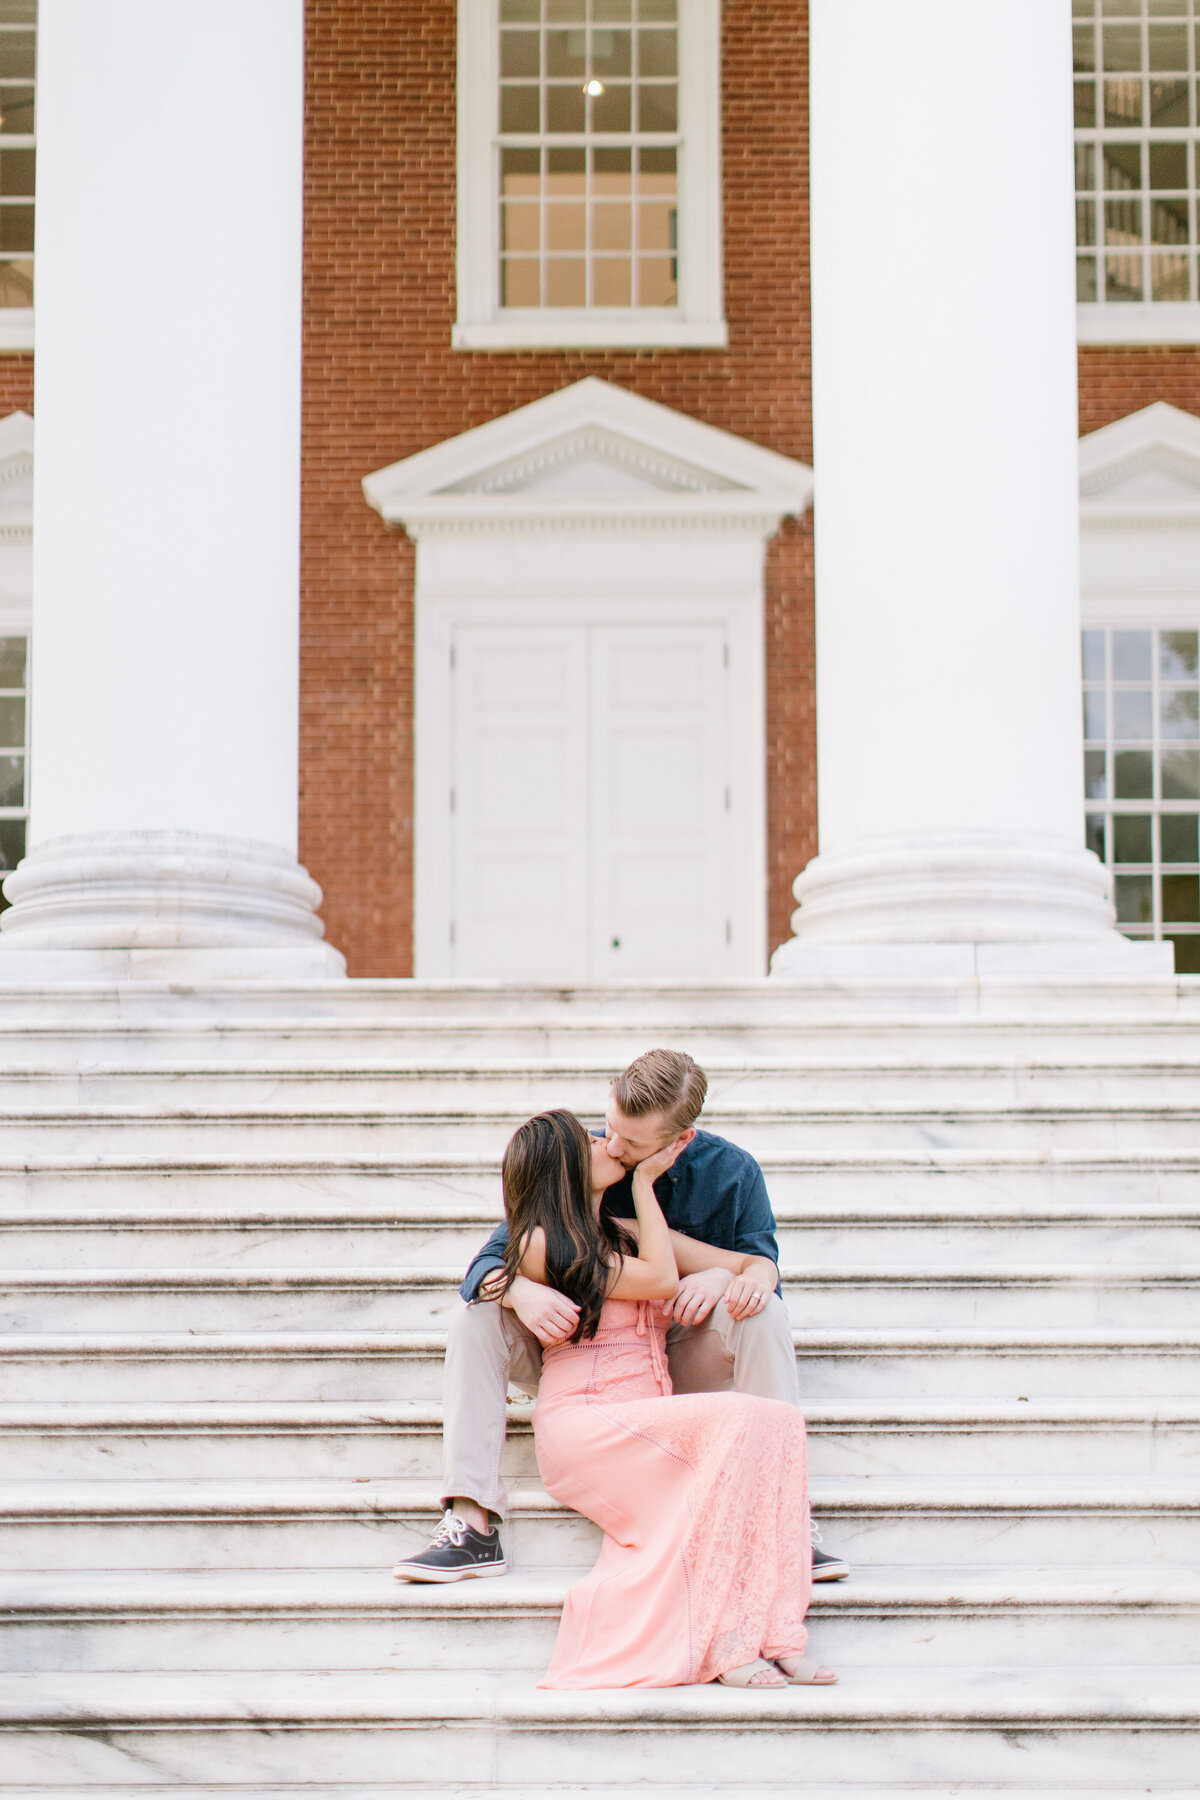 Erin-and-Mitch_Engagement-session_Danielle-Pearce-Photo_117